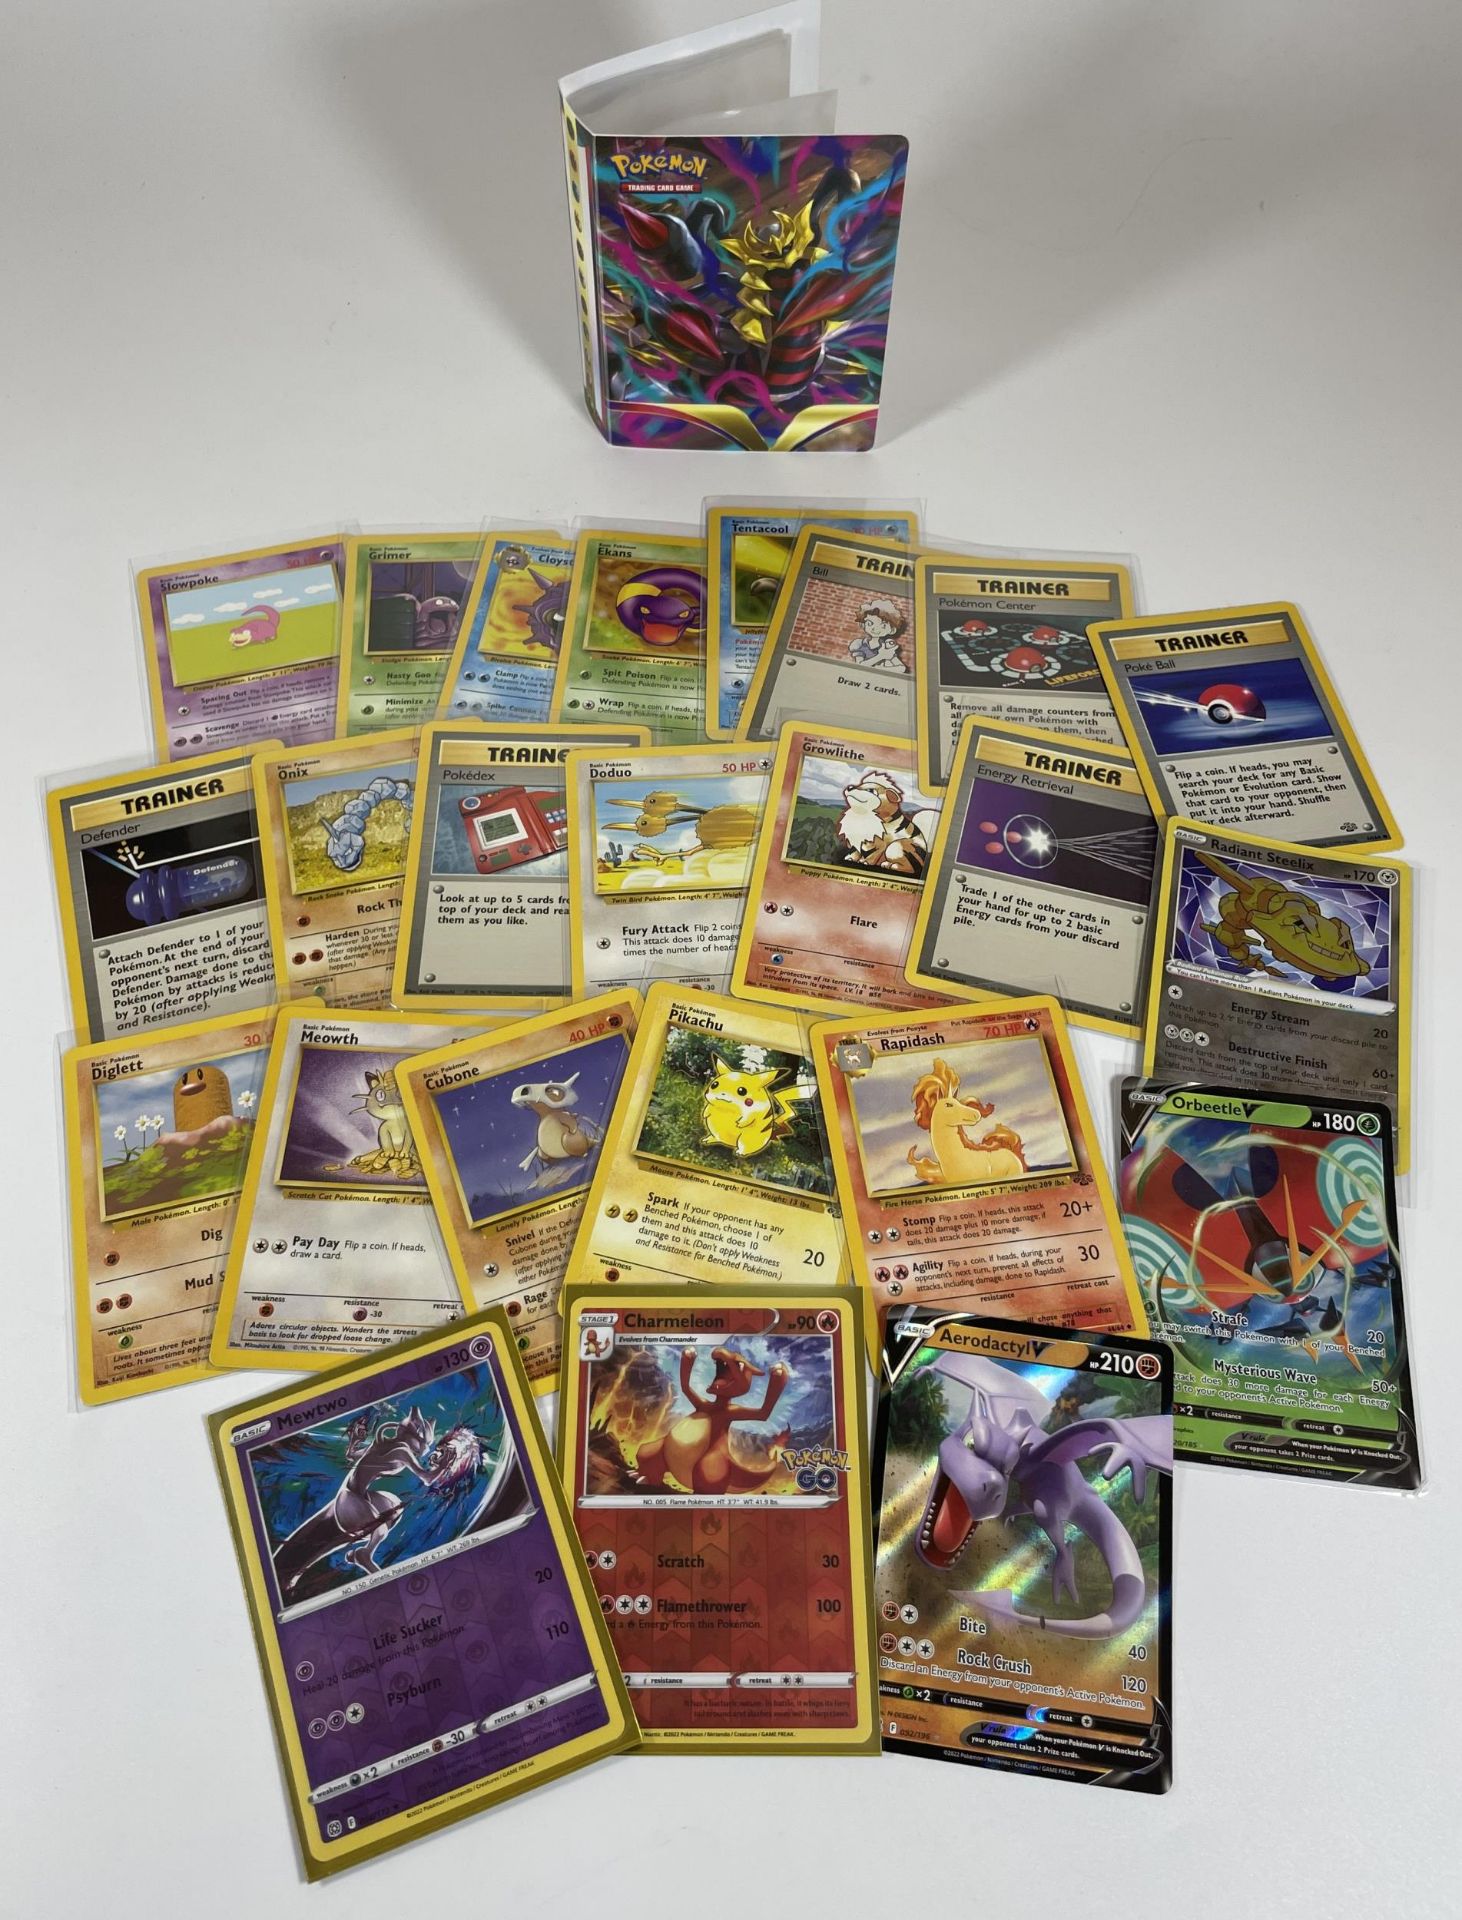 A SMALL POKEMON FOLDER OF CARDS - JUNGLE SET 1999 PIKACHU, FURTHER WOTC CARDS, MEWTWO RADIANT